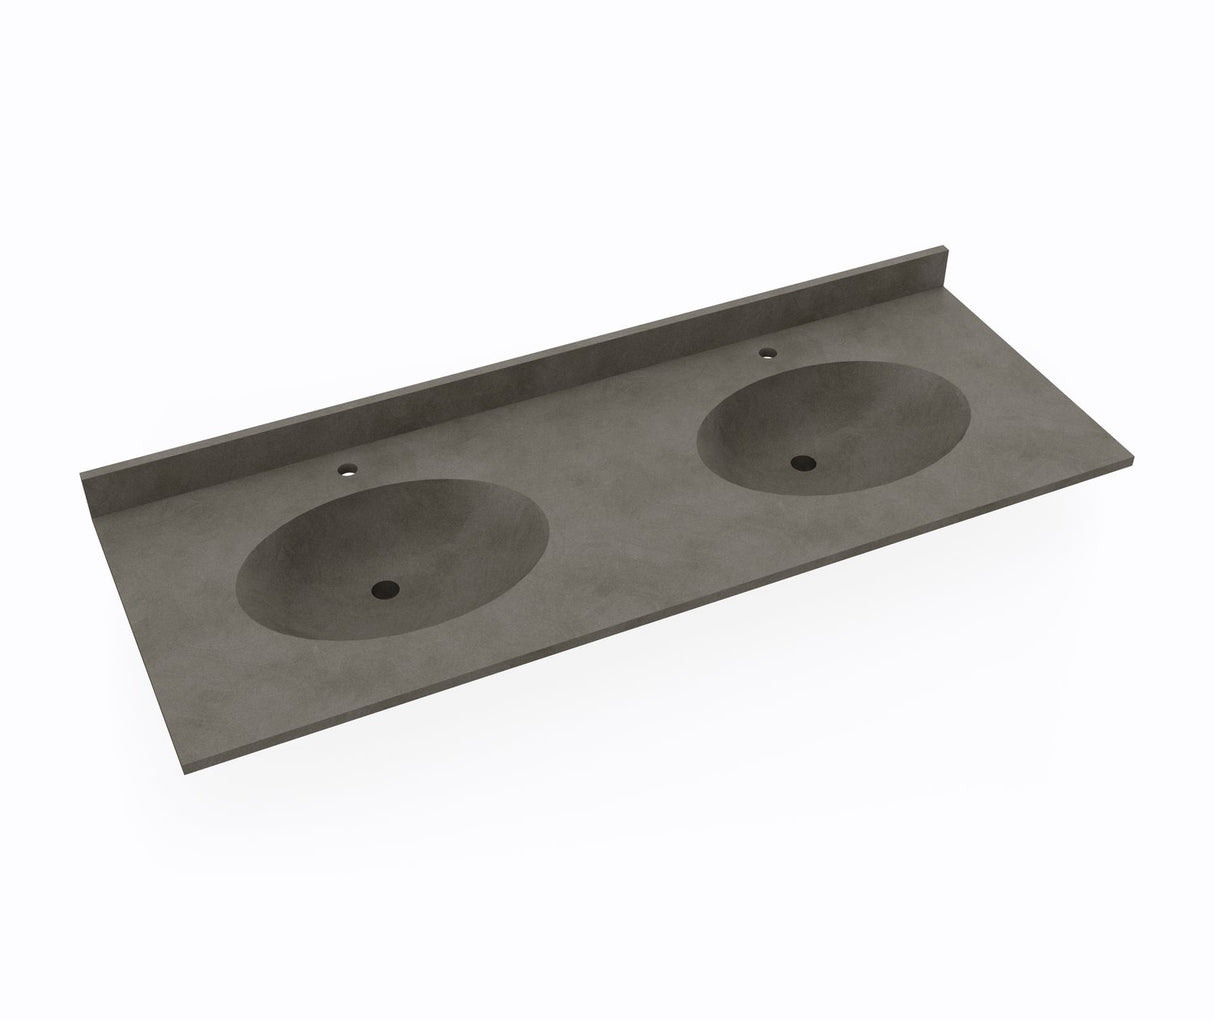 Swanstone CH2B2261 Chesapeake 22 x 61 Double Bowl Vanity Top in Charcoal Gray CH022612B.209